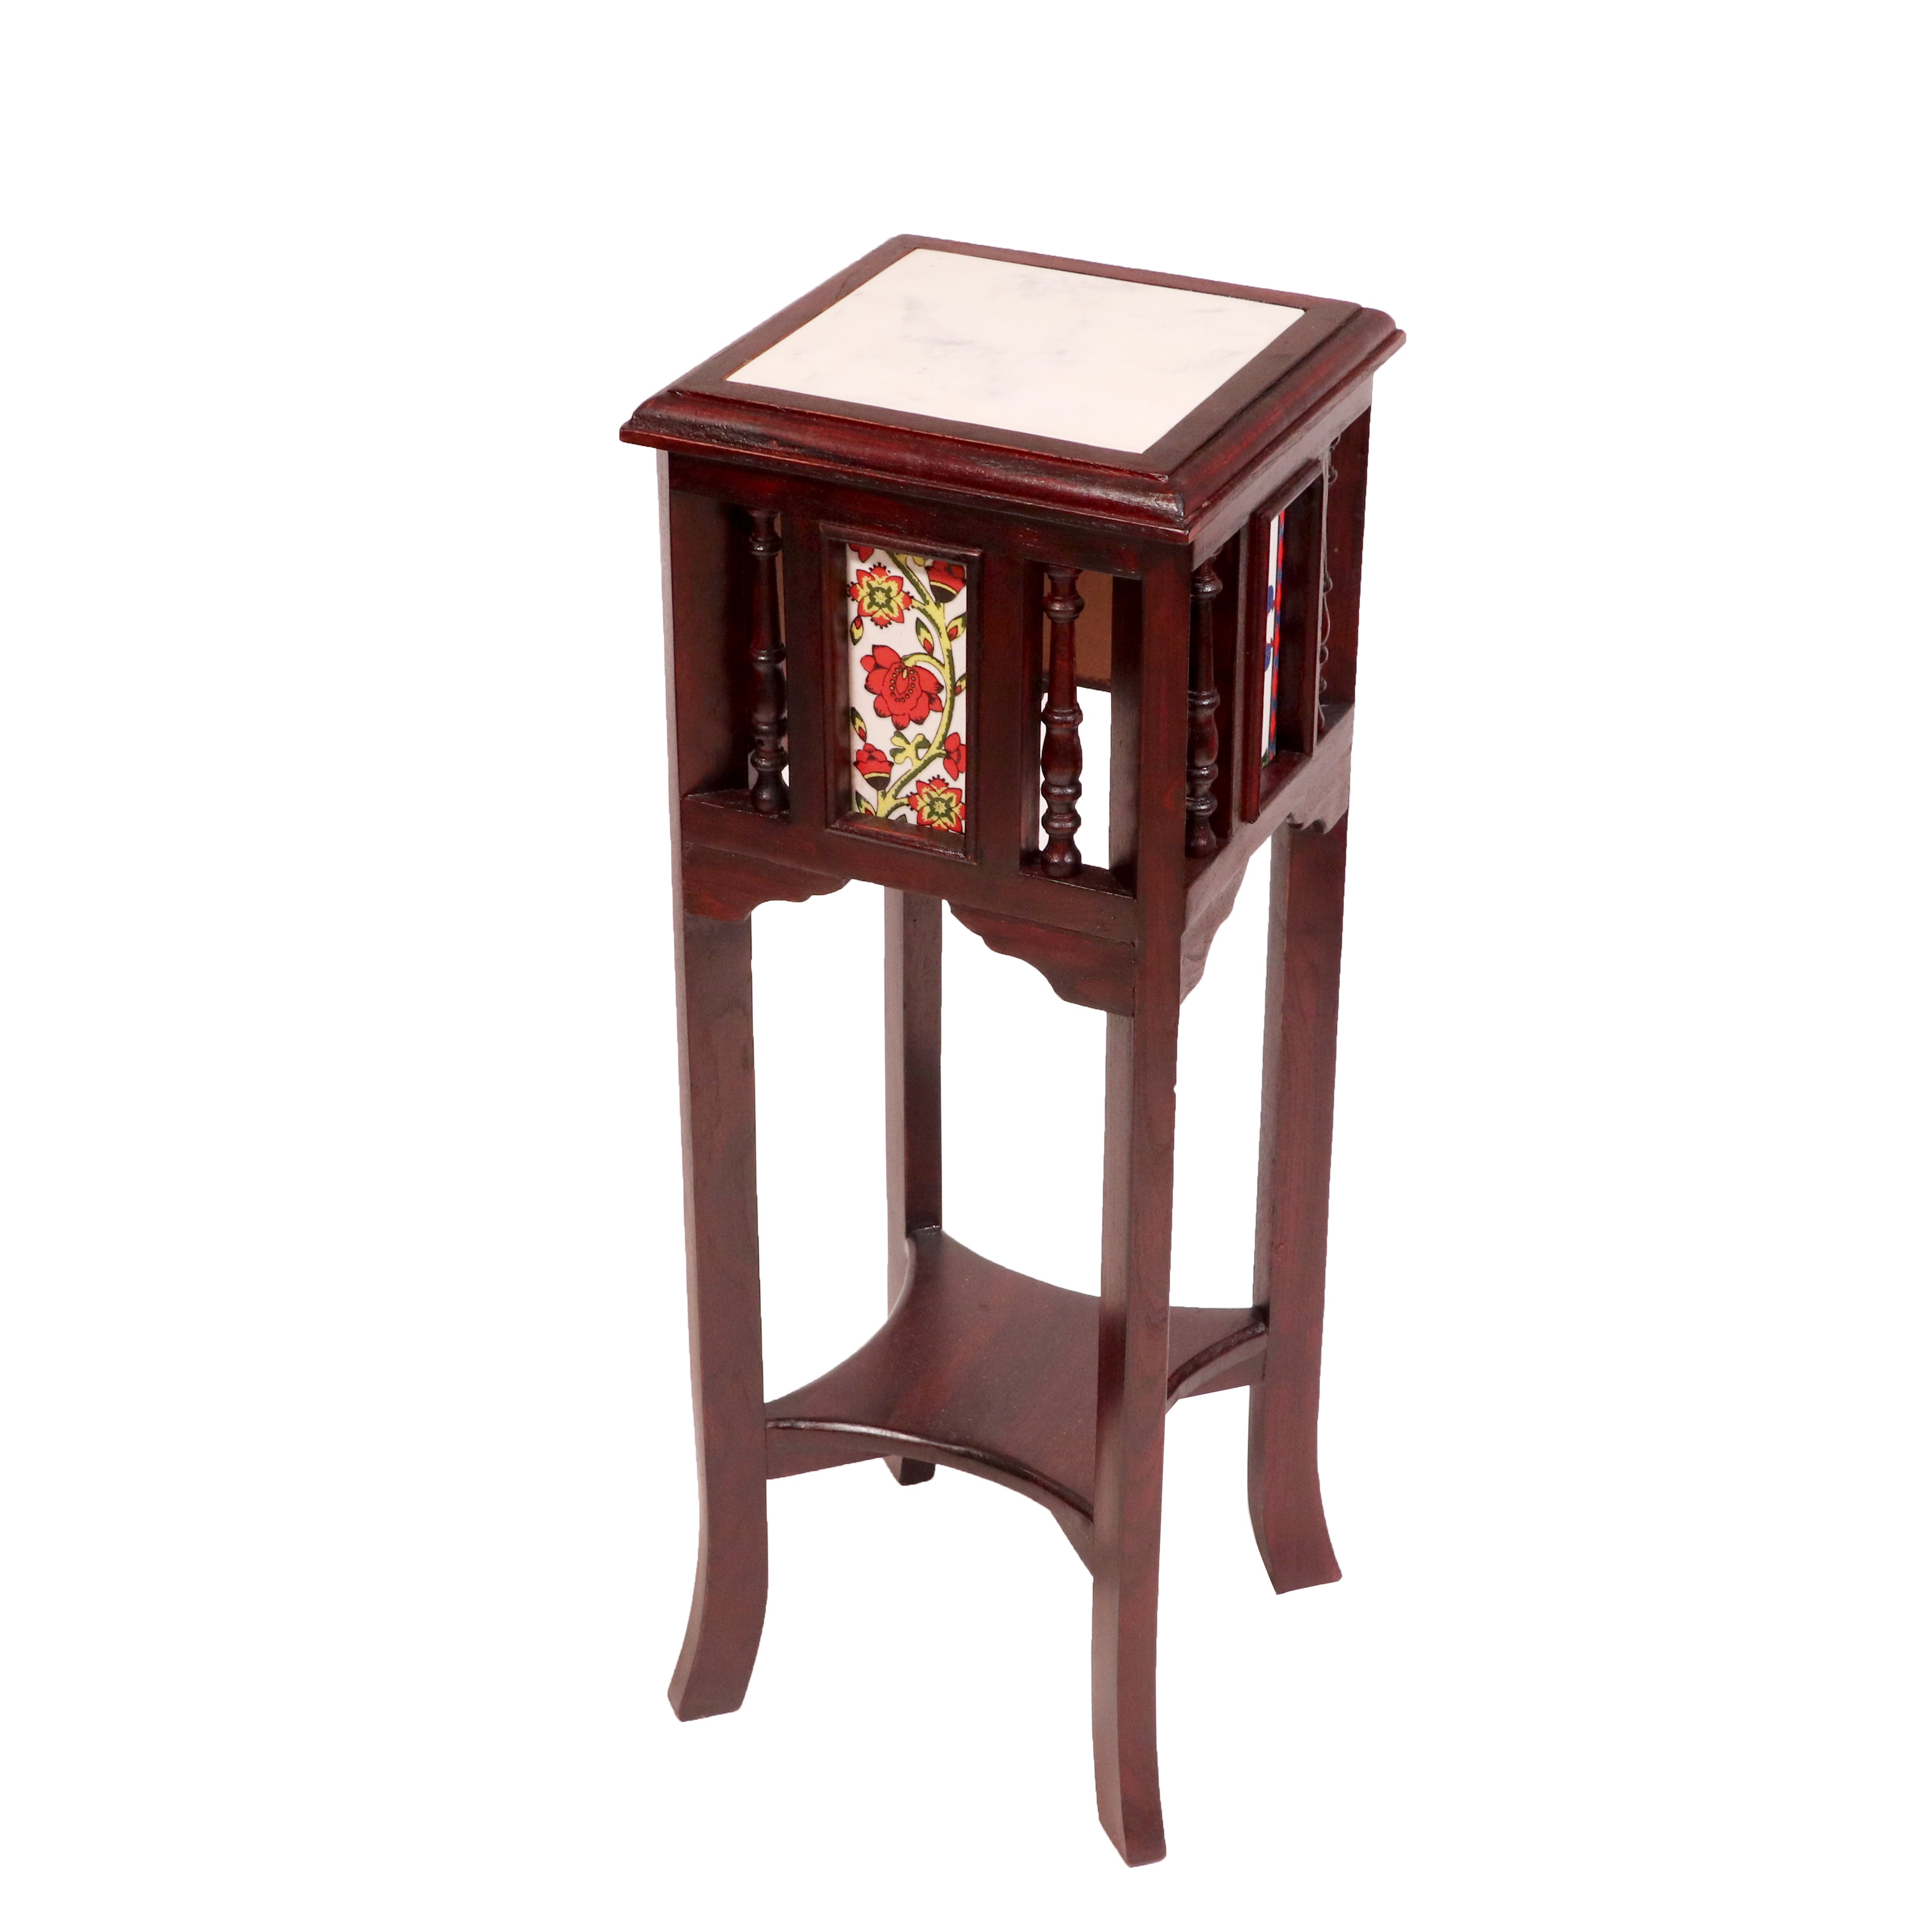 Teak ceramic tile end table with marble top 11 x 11 x 30 Inch End Table